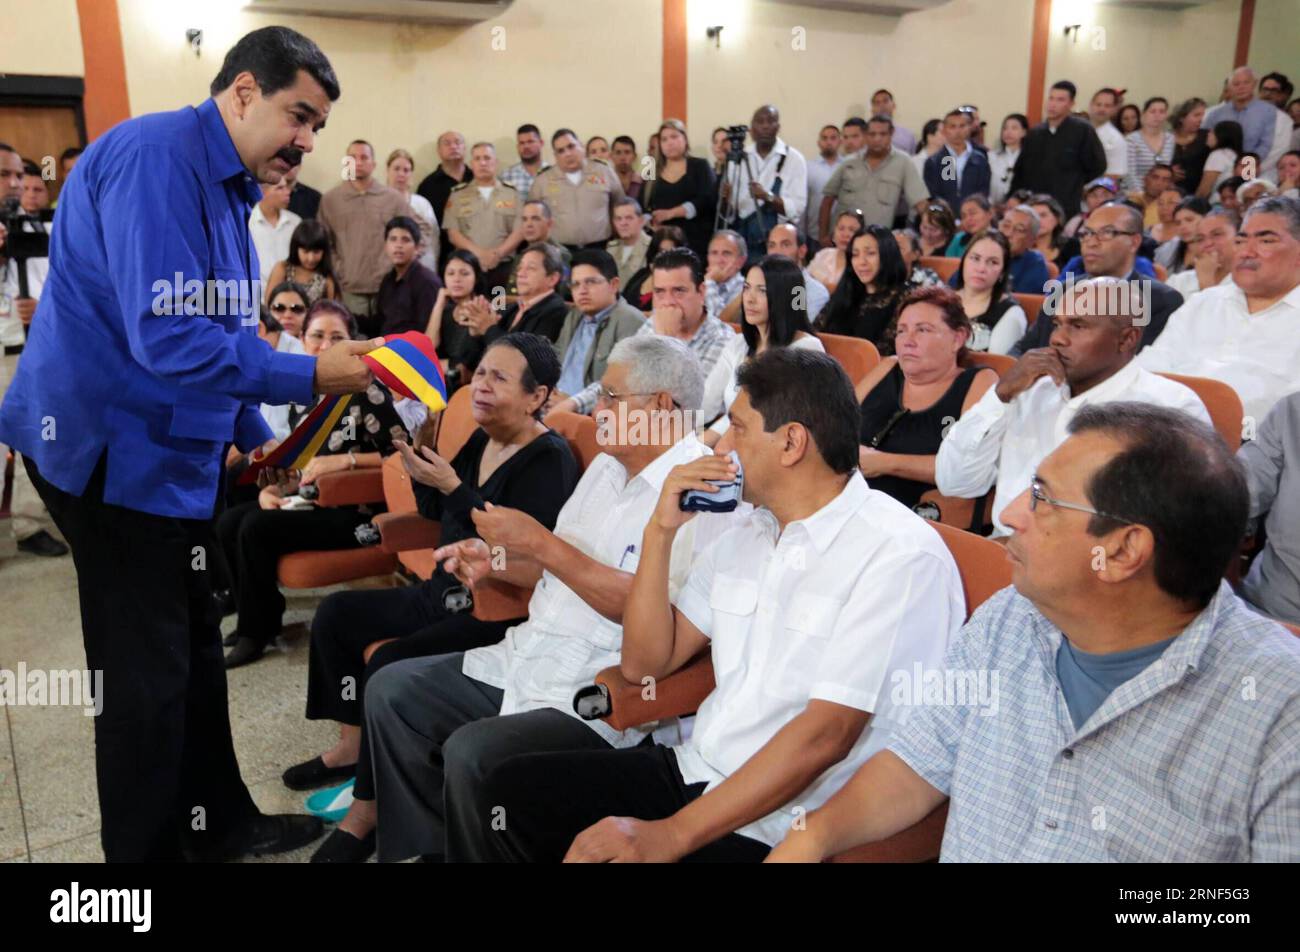 BARINAS, July 19, 2016 -- Image provided by the Venezuelan Presidency shows President Nicolas Maduro (R) interacting with relatives during the funeral of Anibal Chavez, brother of late Venezuelan President Hugo Chavez, at Casa del Alba, in Barinas, Venezuela, on July 19, 2016. ) (jp) (da) NO ARCHIVE-NO SALES EDITORIAL USE ONLY VENEZUELA-BARINAS-POLITICS-FUNERAL VENEZUELA SxPRESIDENCY PUBLICATIONxNOTxINxCHN   Barinas July 19 2016 Image provided by The Venezuelan Presidency Shows President Nicolas Maduro r interacting With Relatives during The Funeral of Anibal Chavez Brother of Late Venezuelan Stock Photo